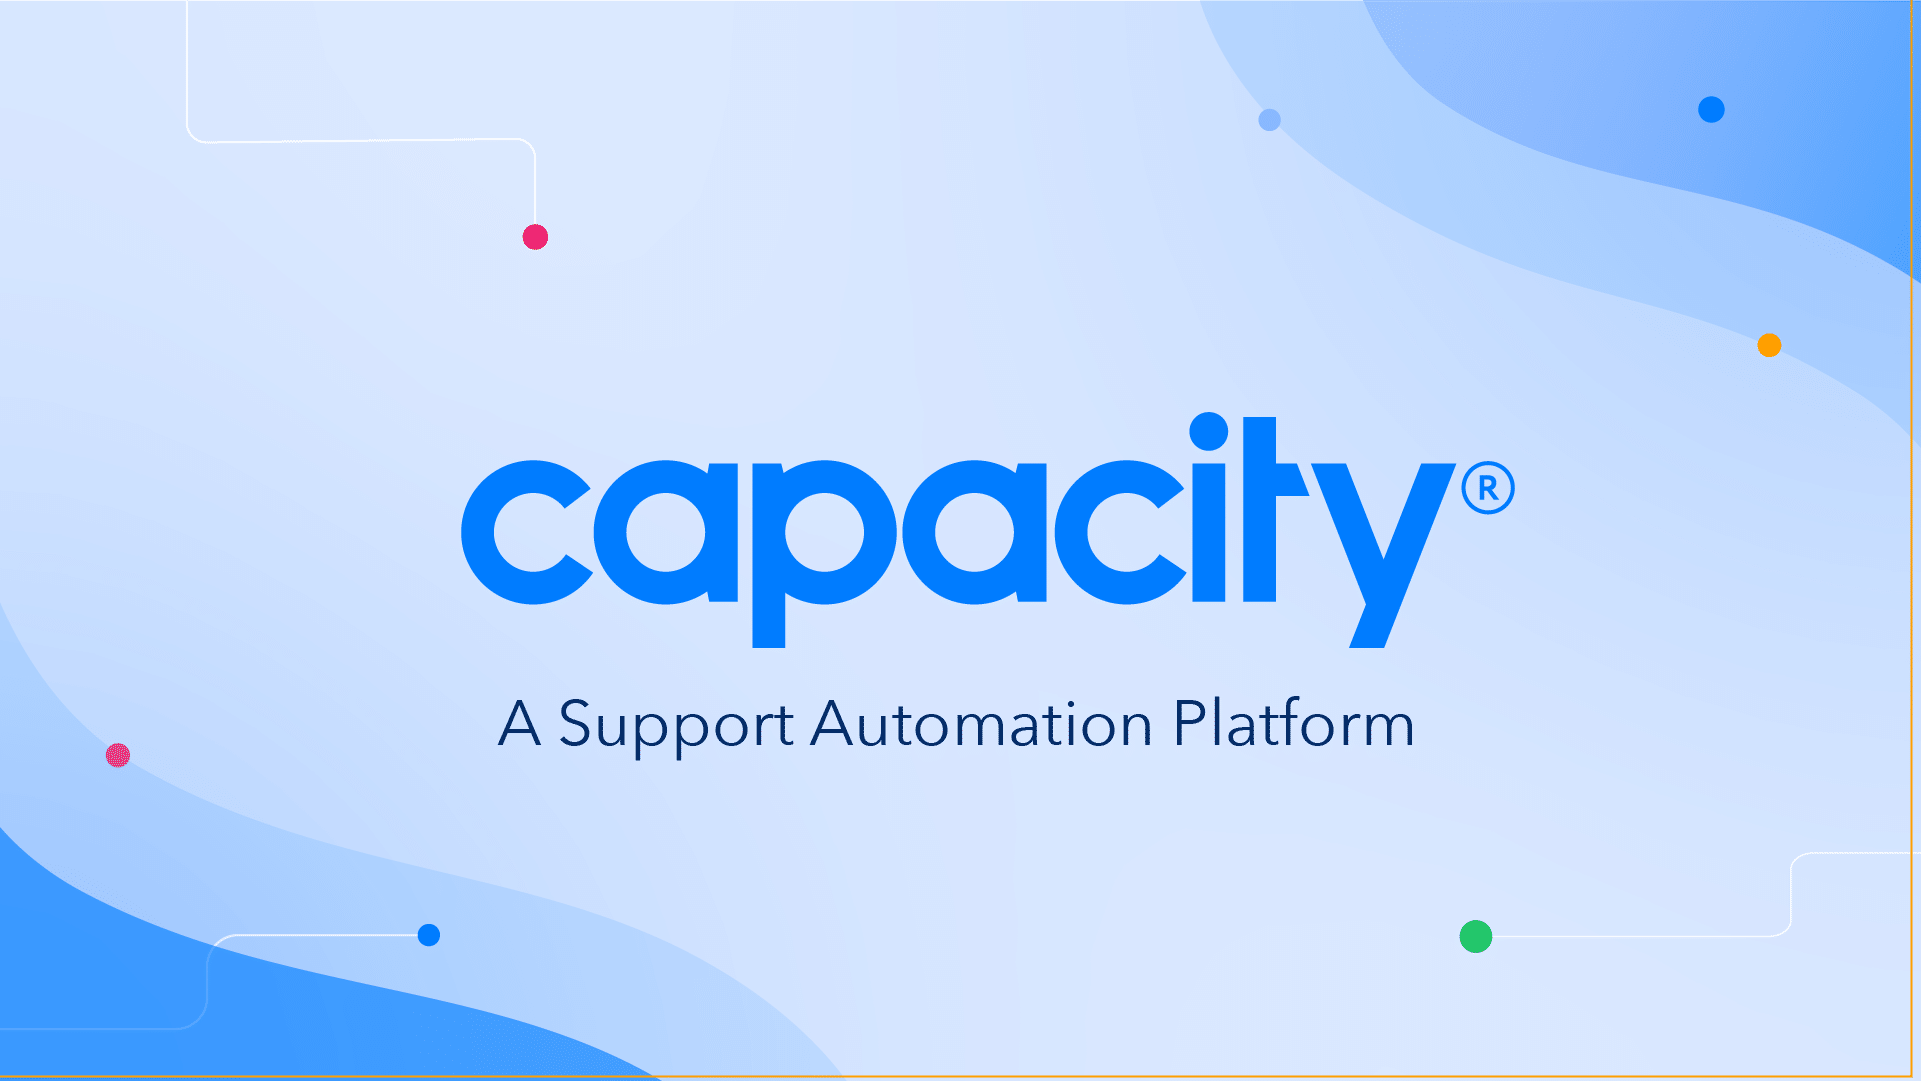 Capacity is a support automation platform